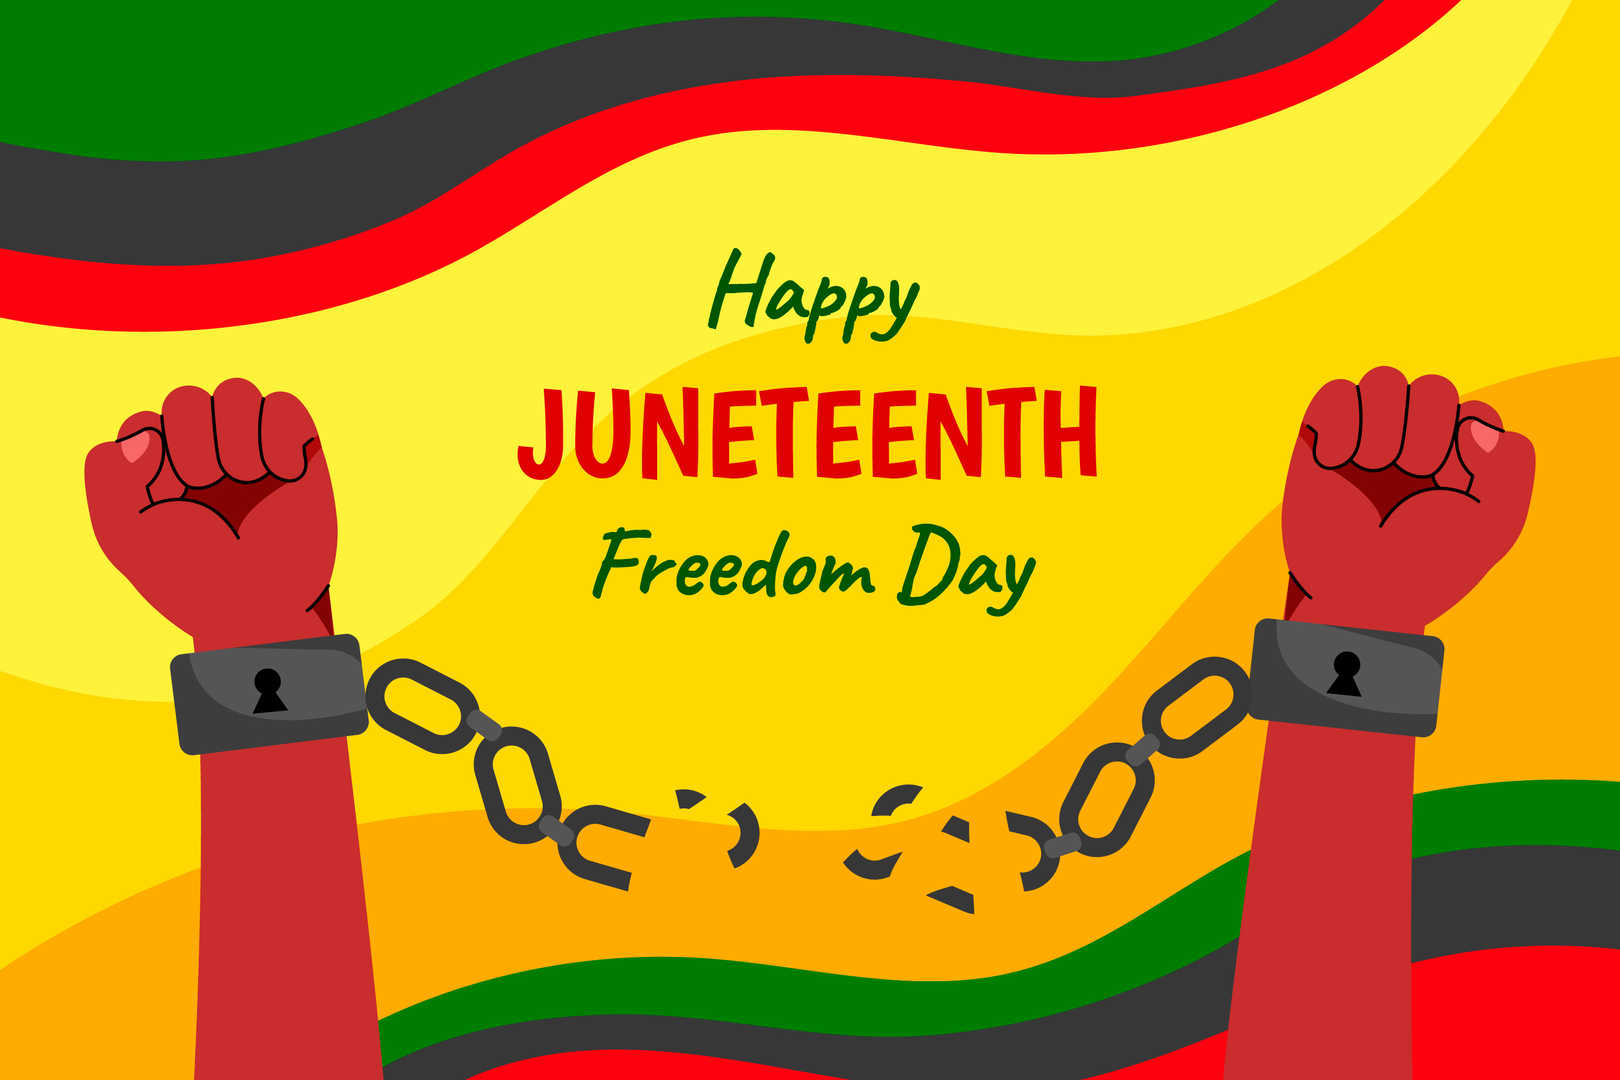 Juneteenth and how it started